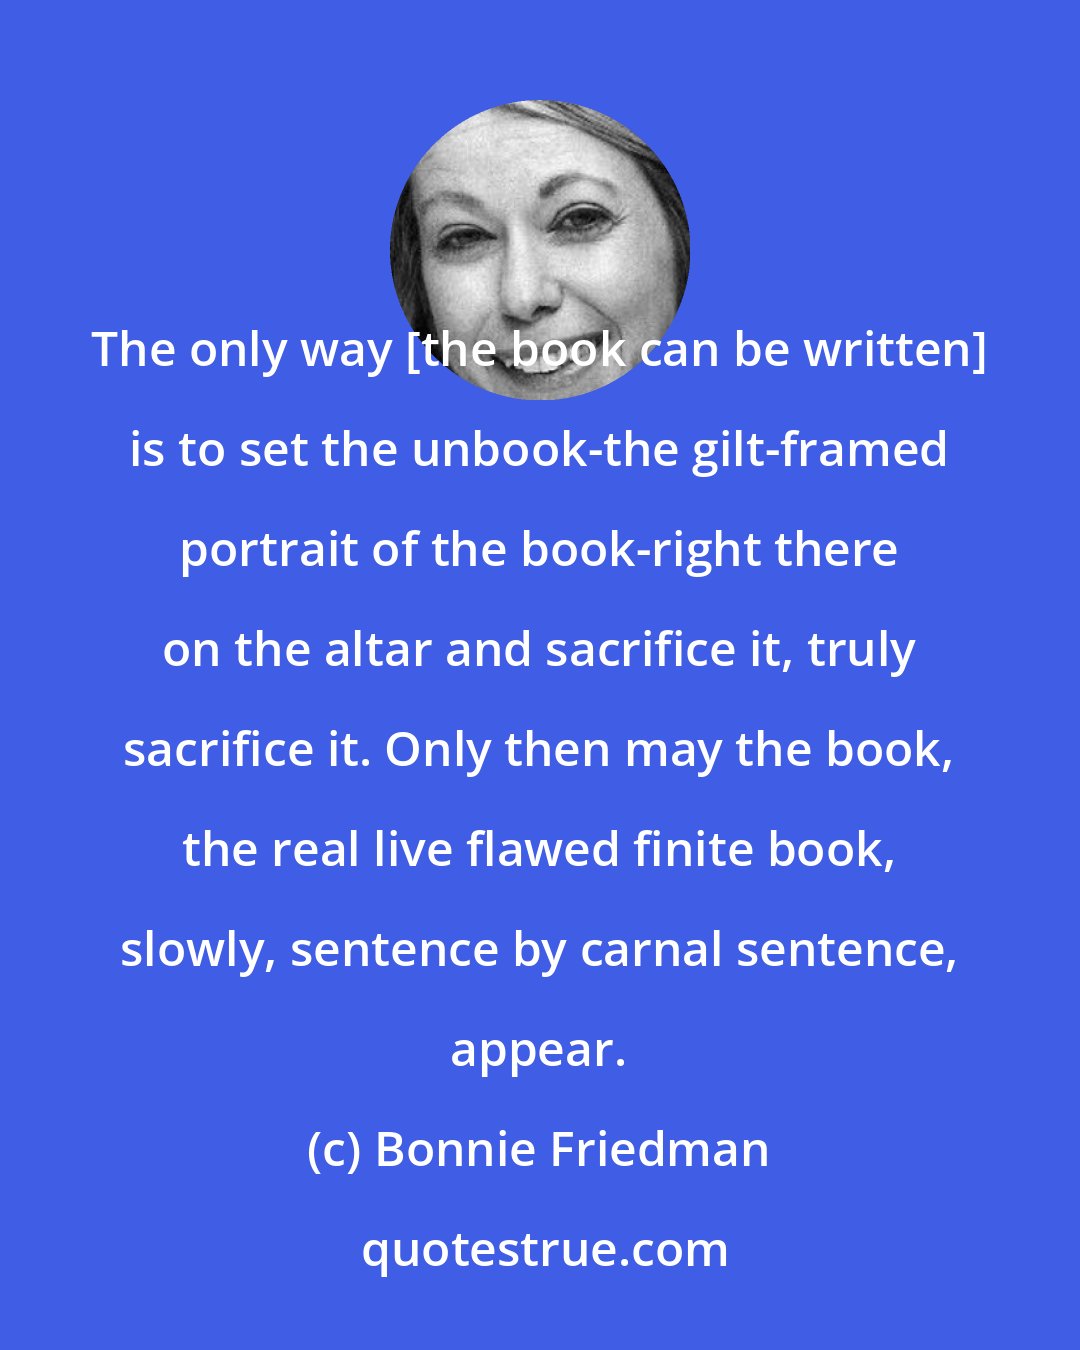 Bonnie Friedman: The only way [the book can be written] is to set the unbook-the gilt-framed portrait of the book-right there on the altar and sacrifice it, truly sacrifice it. Only then may the book, the real live flawed finite book, slowly, sentence by carnal sentence, appear.